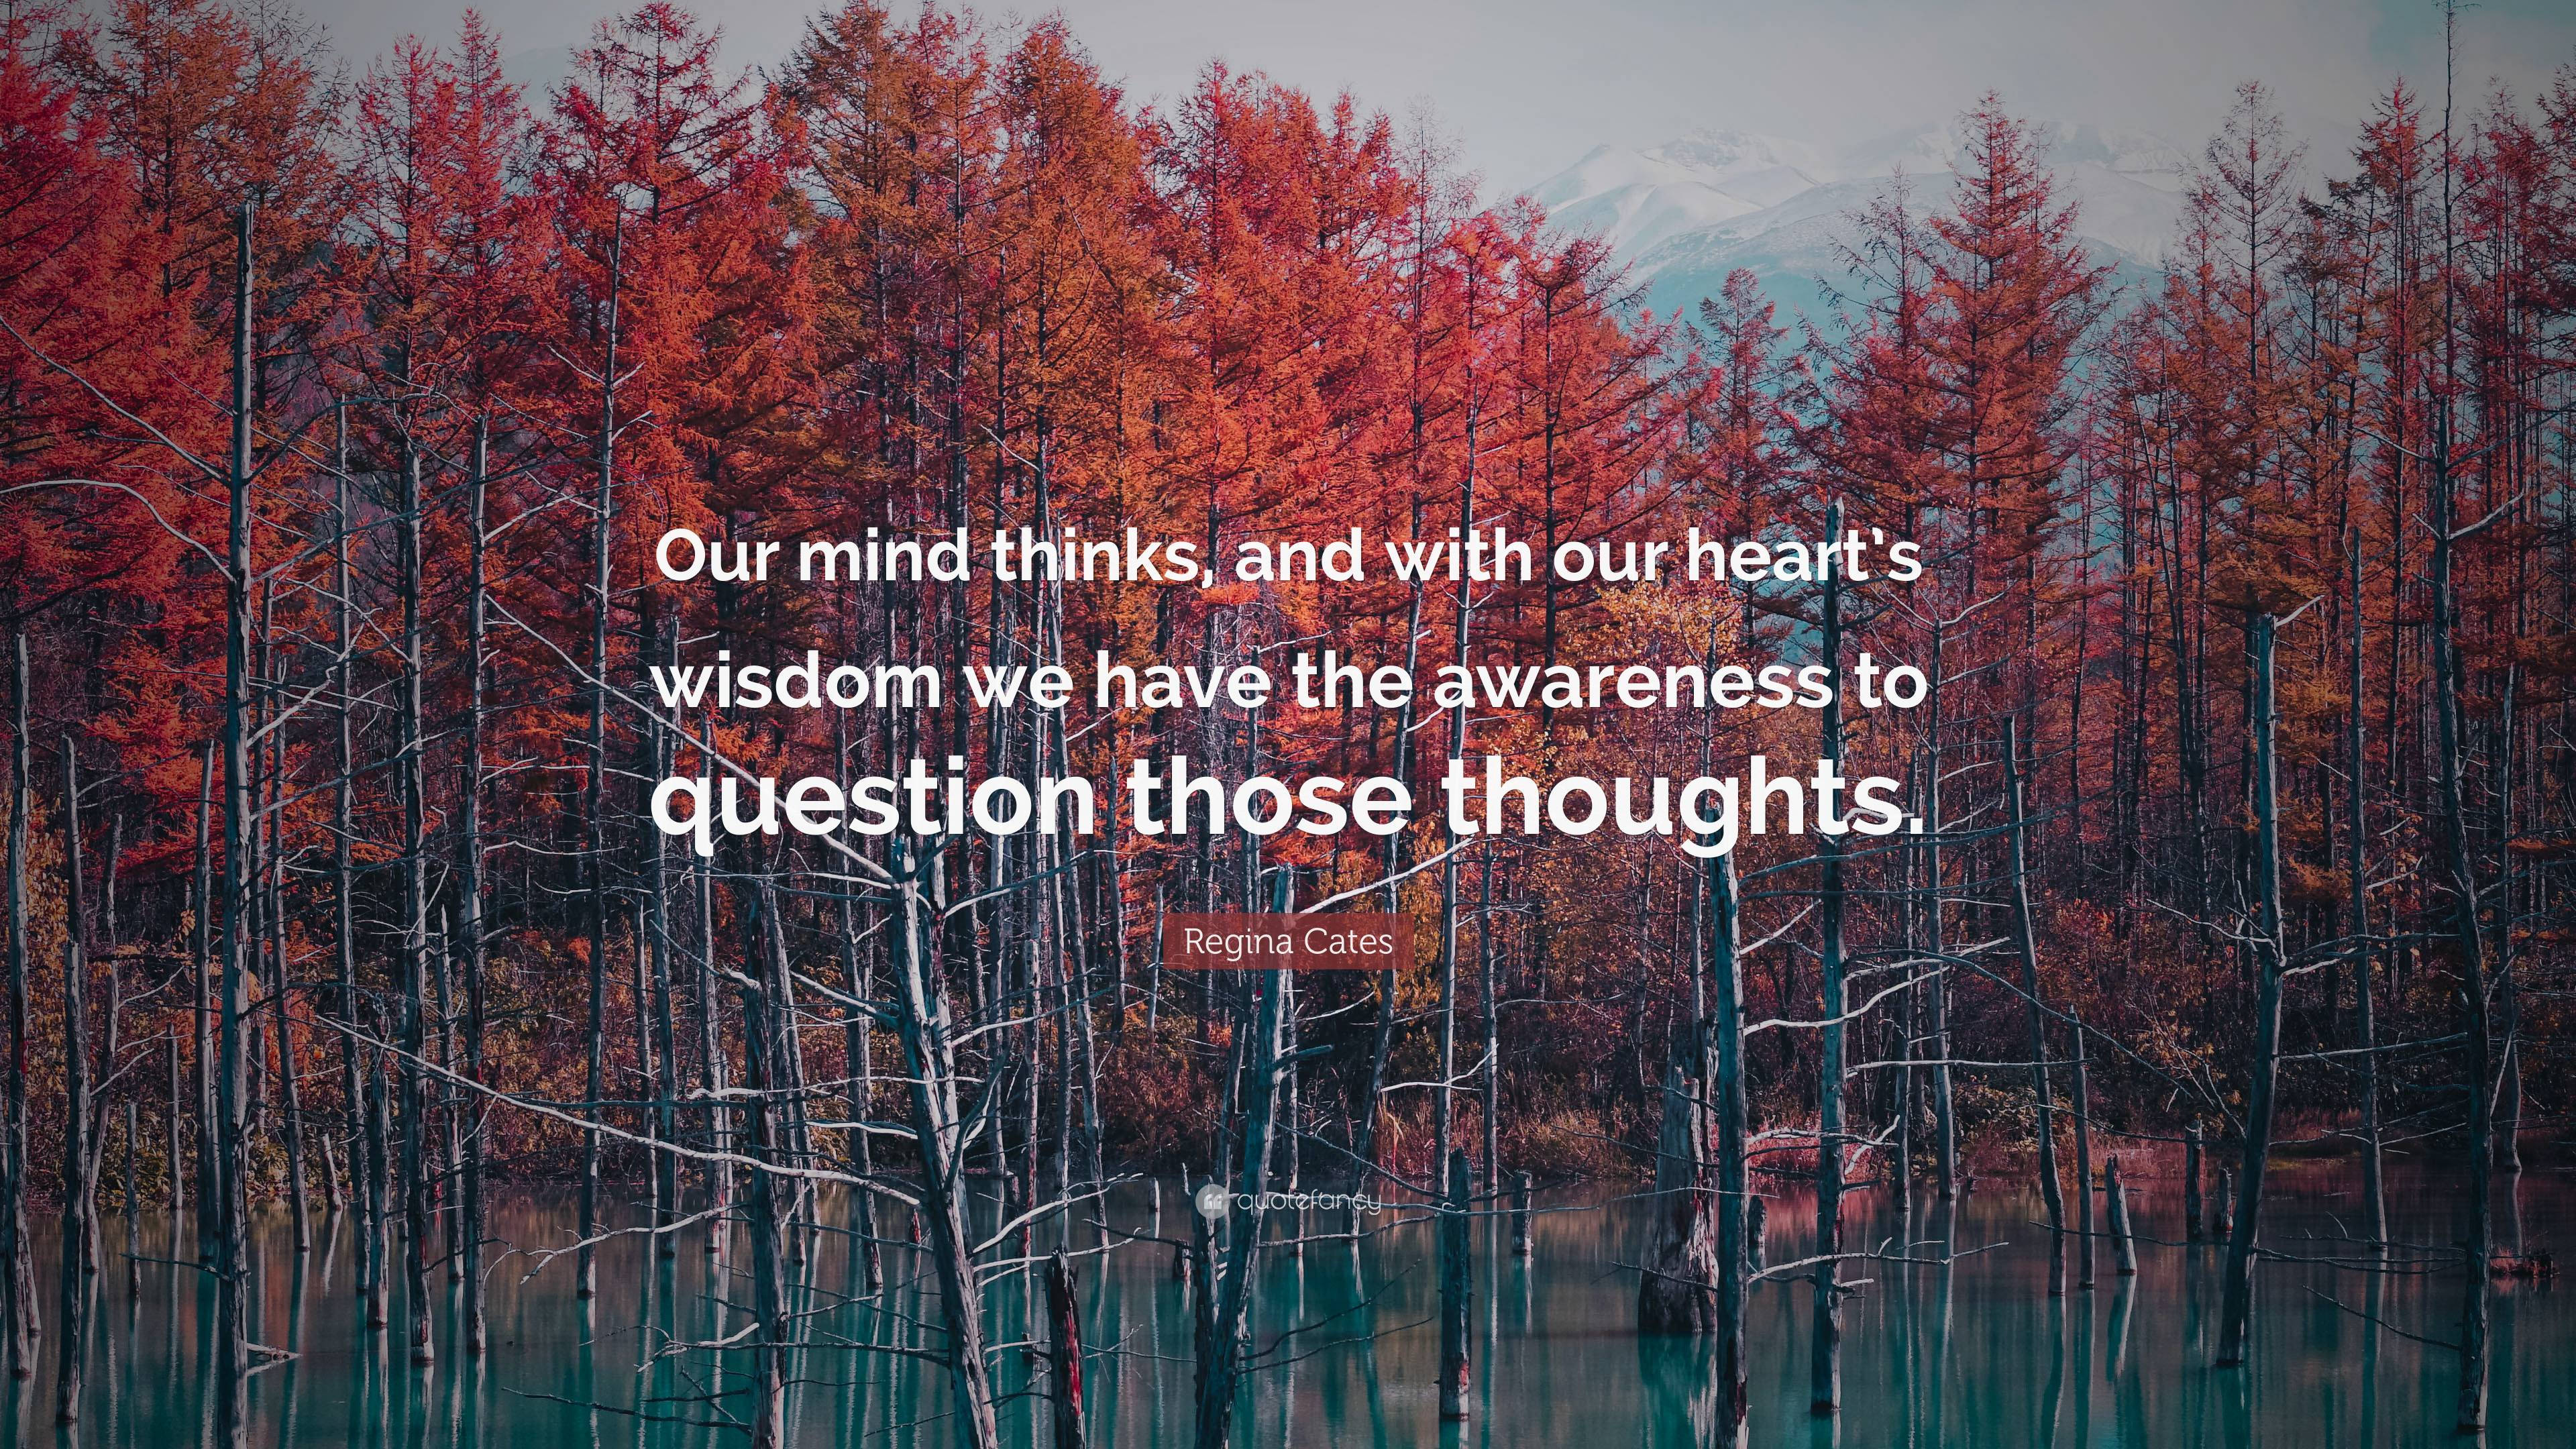 Regina Cates Quote: “Our mind thinks, and with our heart’s wisdom we ...